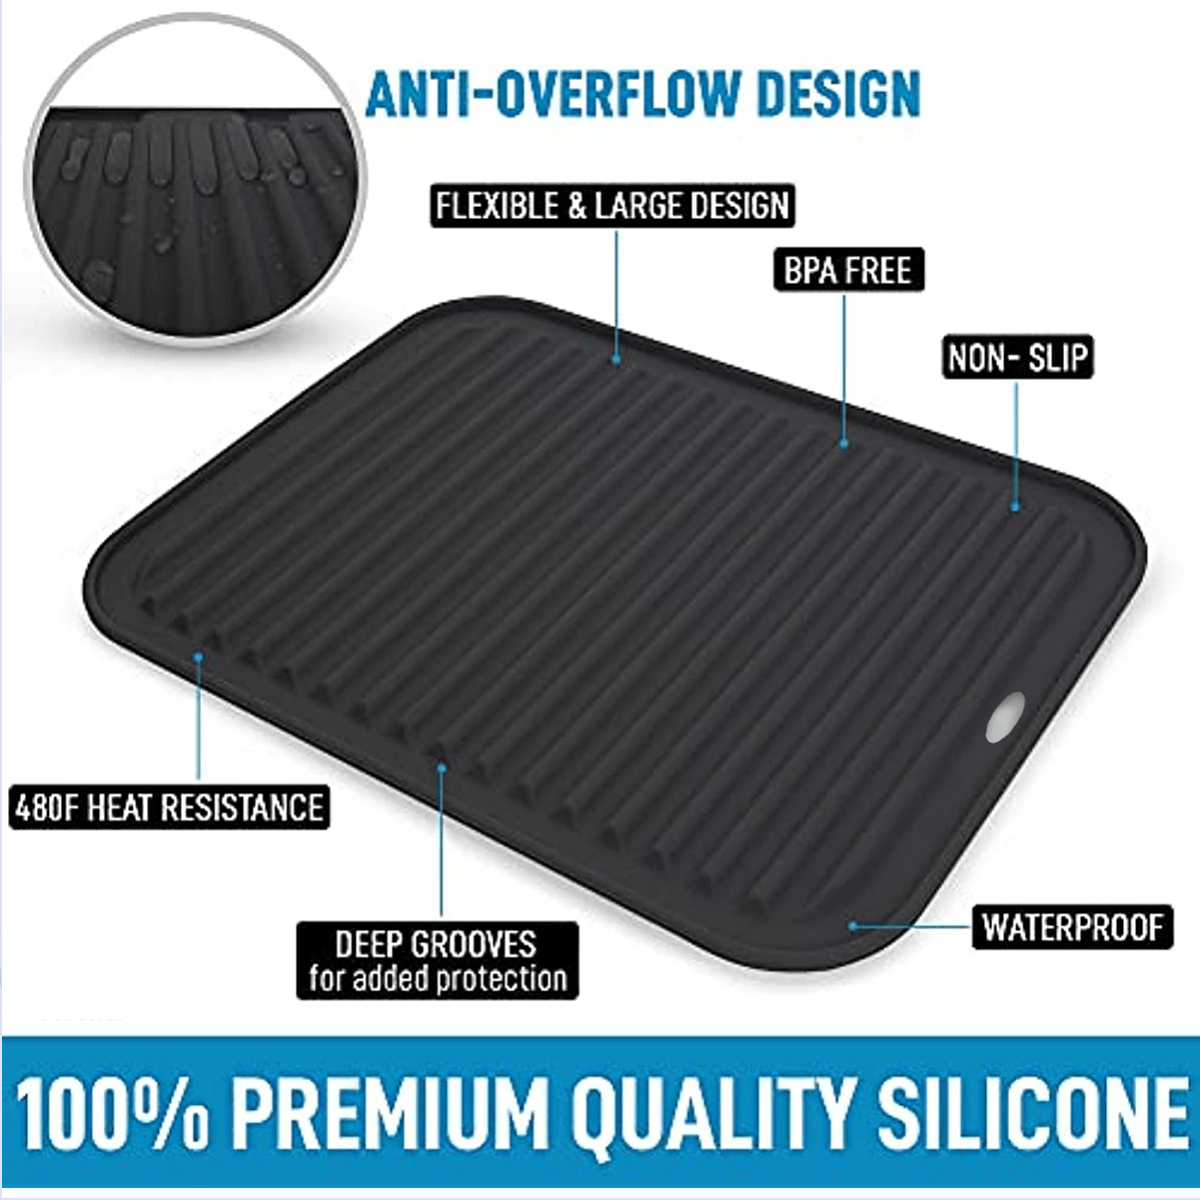 3pcs Grey Silicone Kitchen Mat For Worktop, Table Protector Heat ,hot  Dishes,pots And Pans - Waterproof Trivet Mat, Non-slip Table Mats And  Coasters 